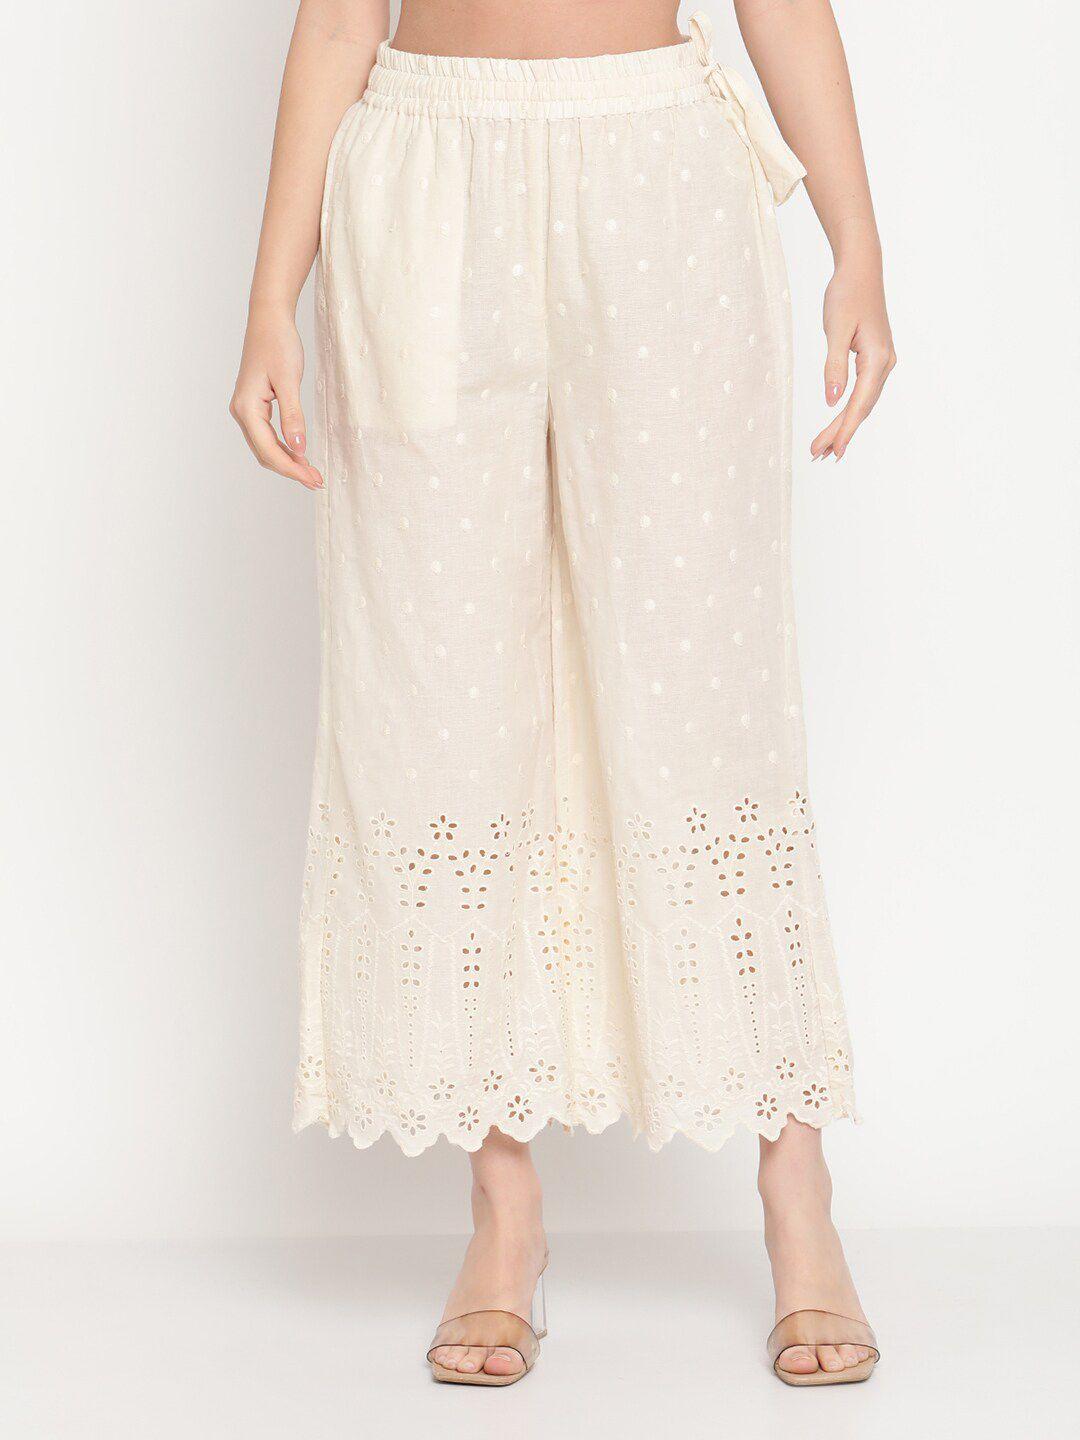 tag 7 women cream-coloured paisley embroidered flared ethnic palazzos